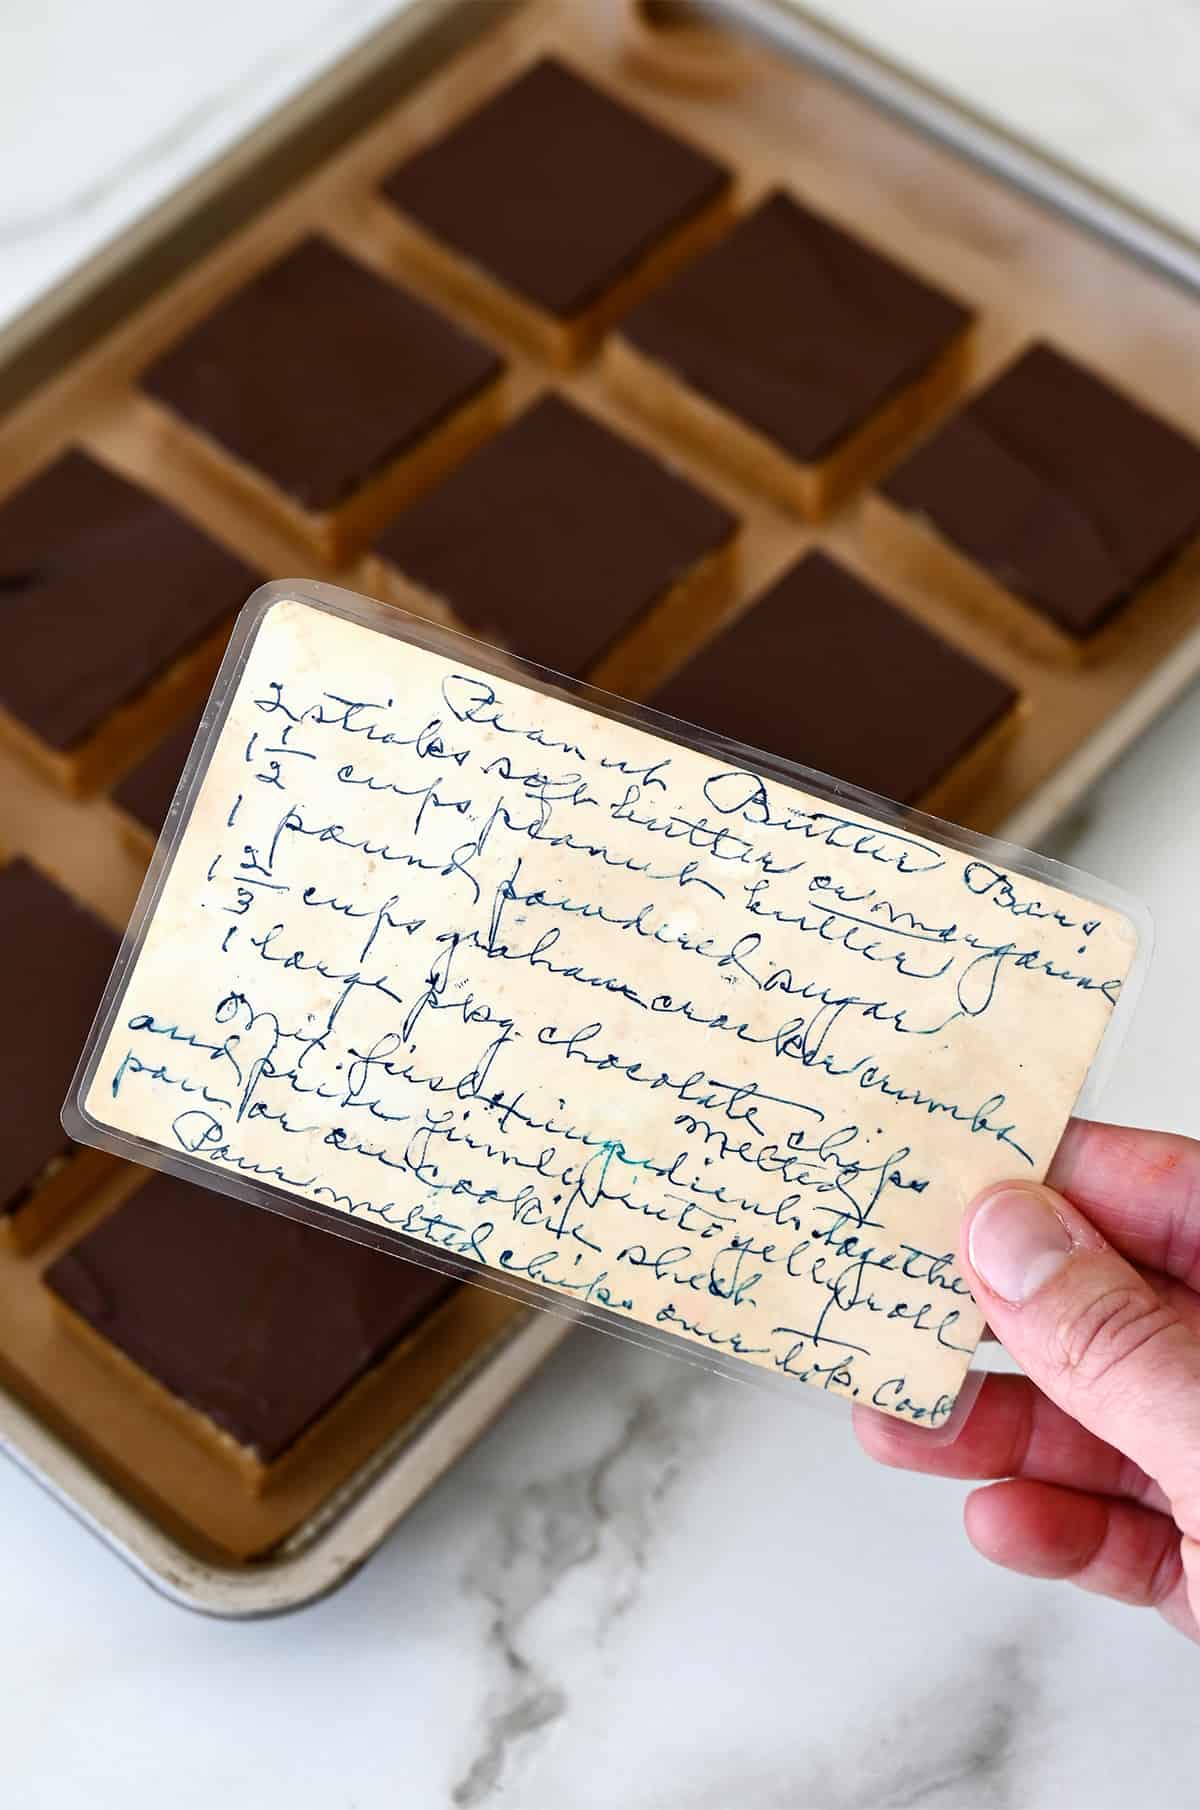 Kelly Senyei's great-grandmother's recipe card for peanut butter bars with melted chocolate.